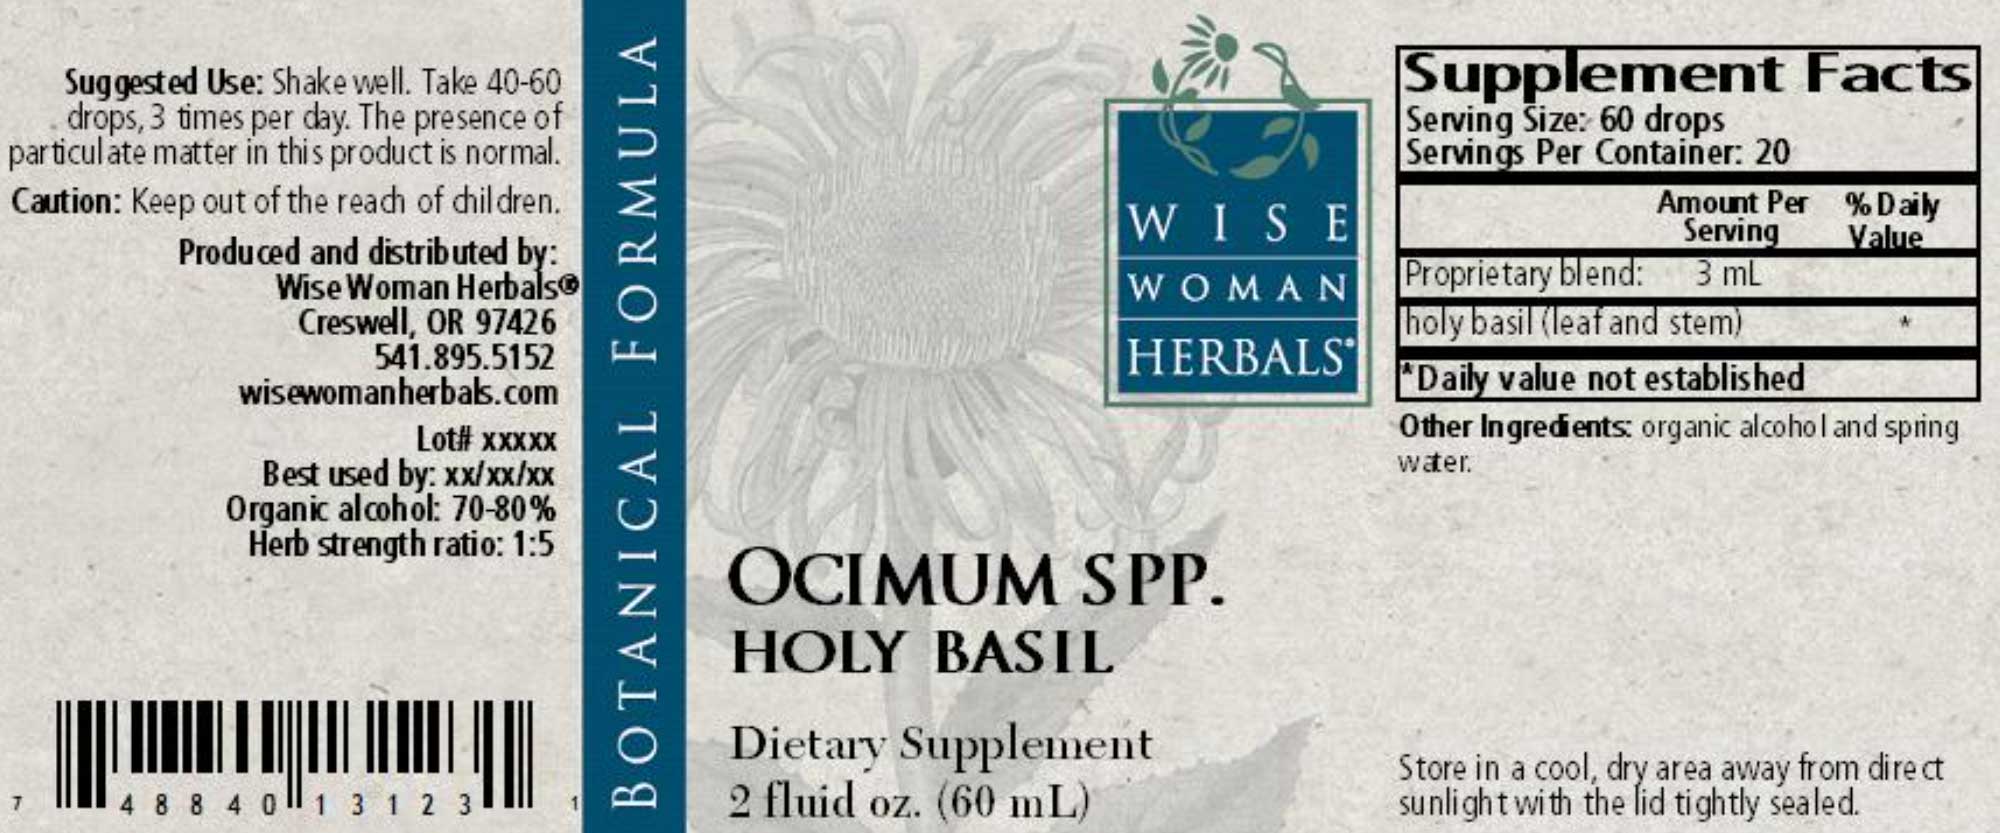 Wise Woman Herbals Ocimum Spp Holy Basil Label